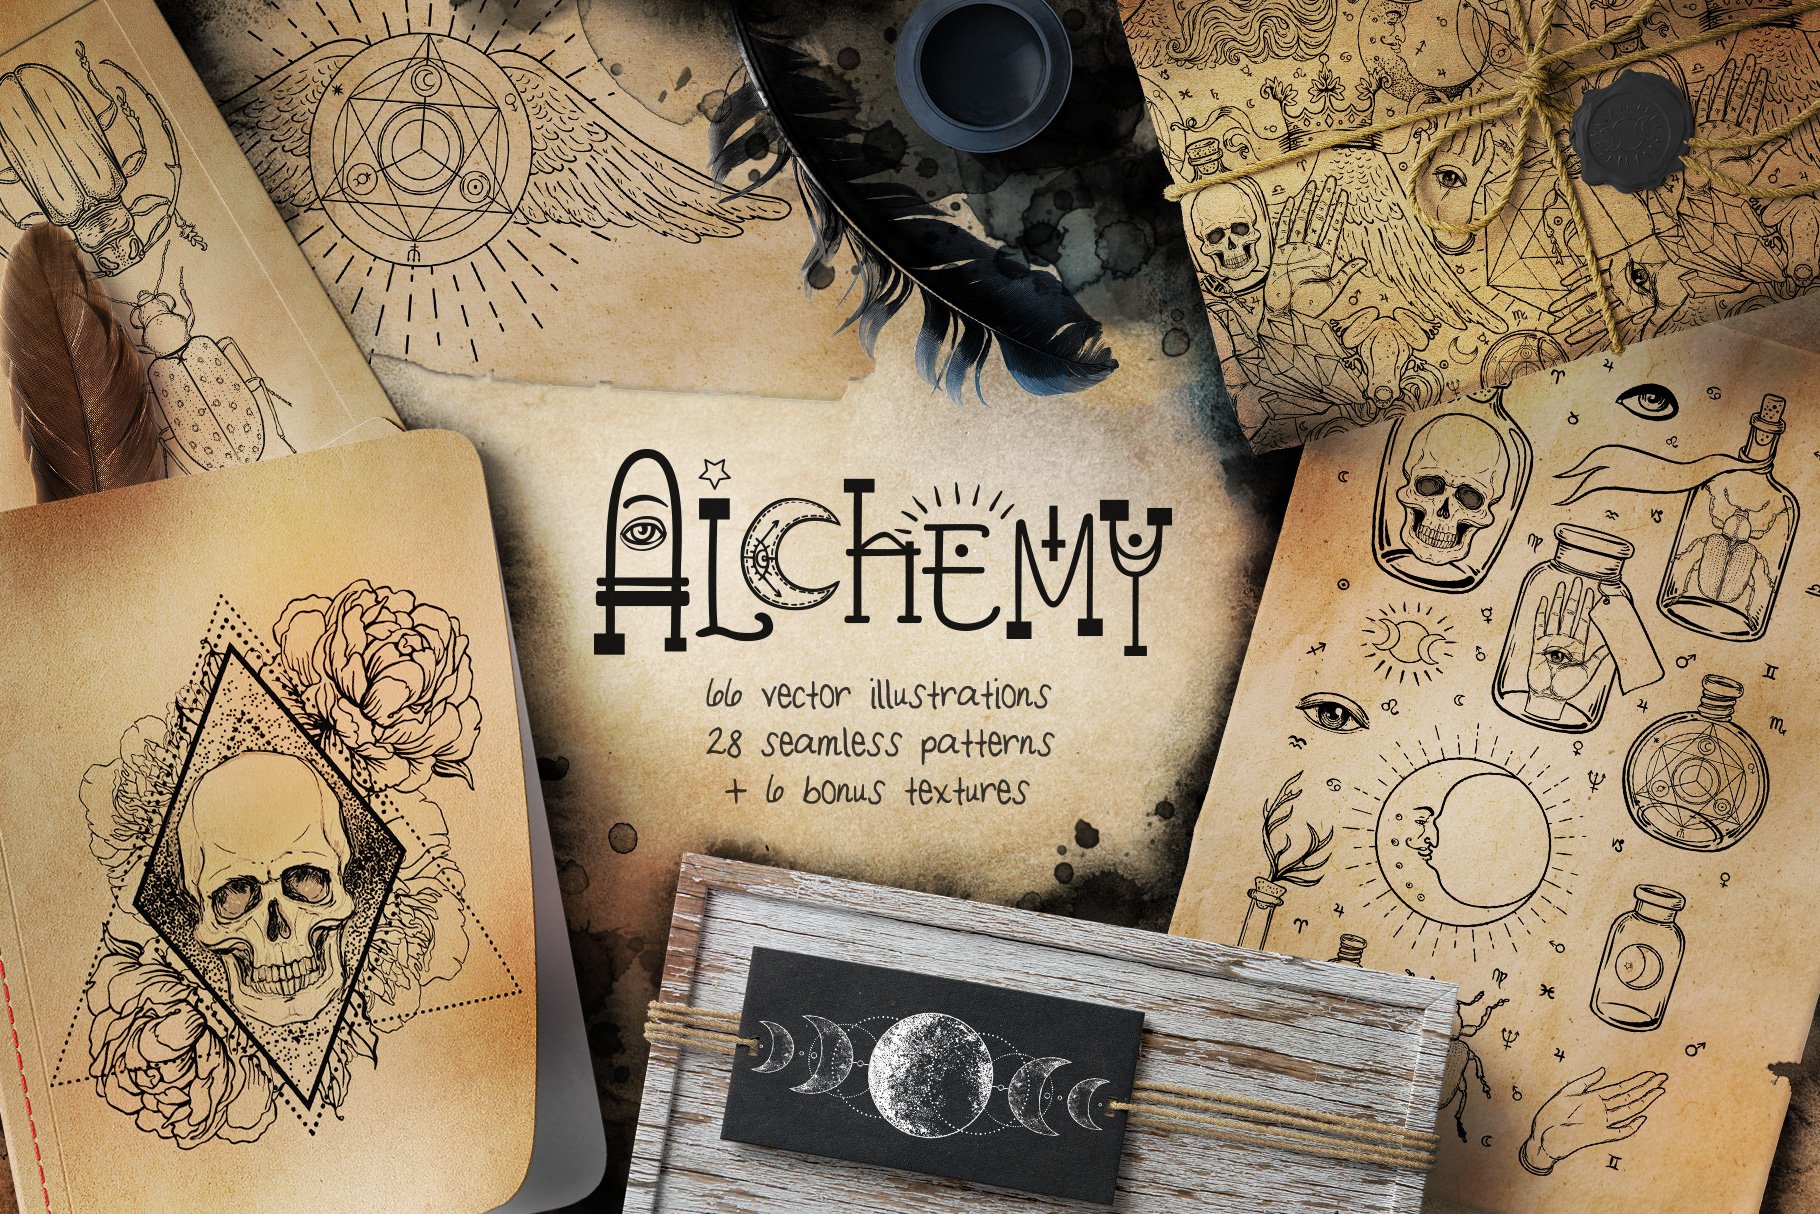 100 ALCHEMY. Magic Vector Set. cover image.